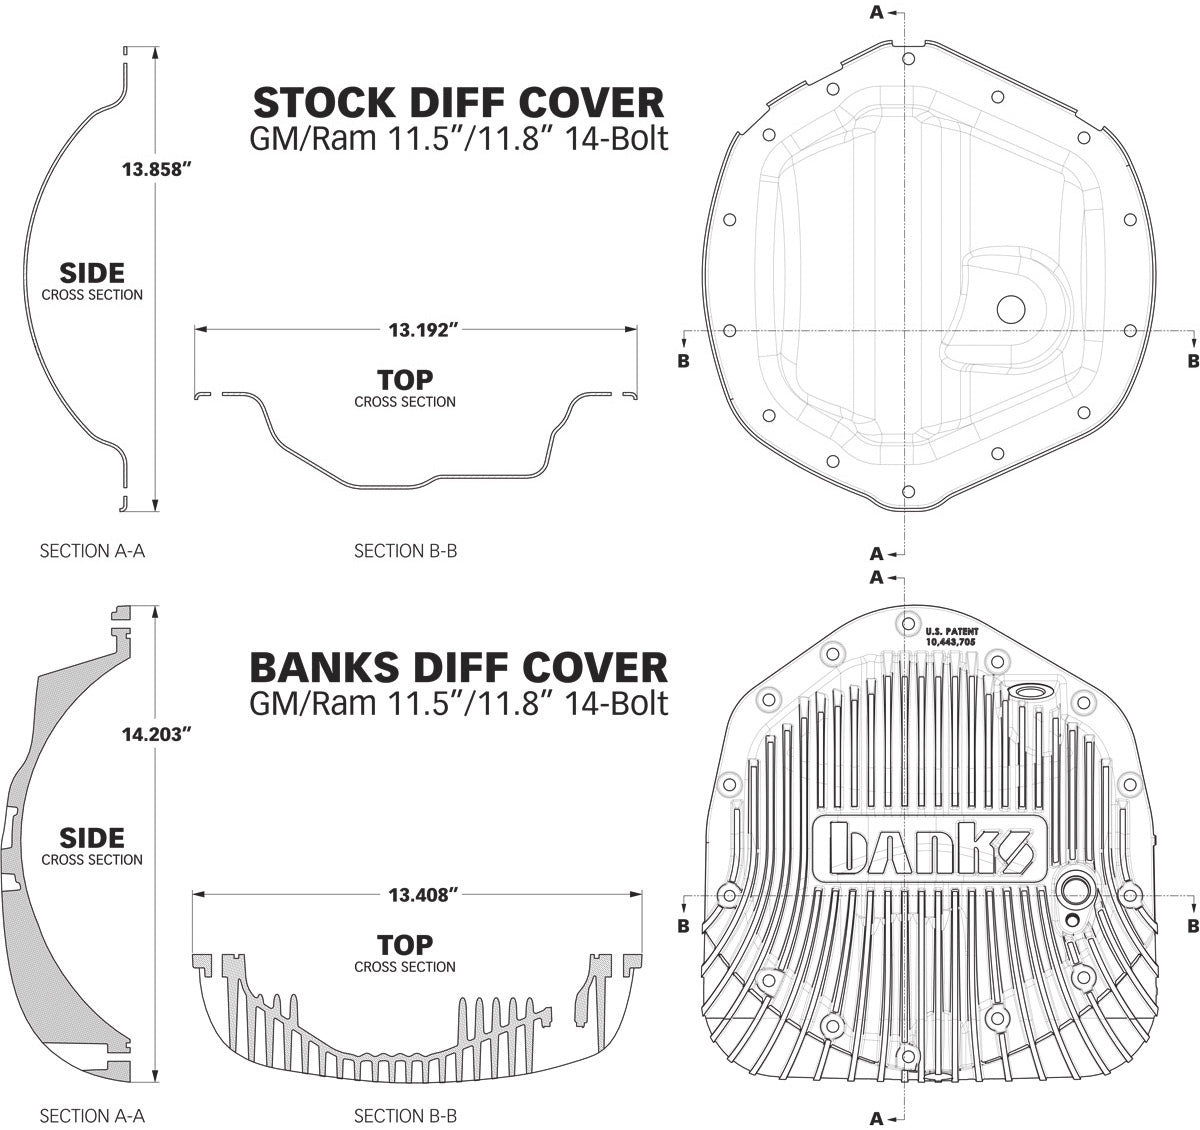 2D blueprint showing cross sections of factory differential cover vs Banks Ram-Air Cover